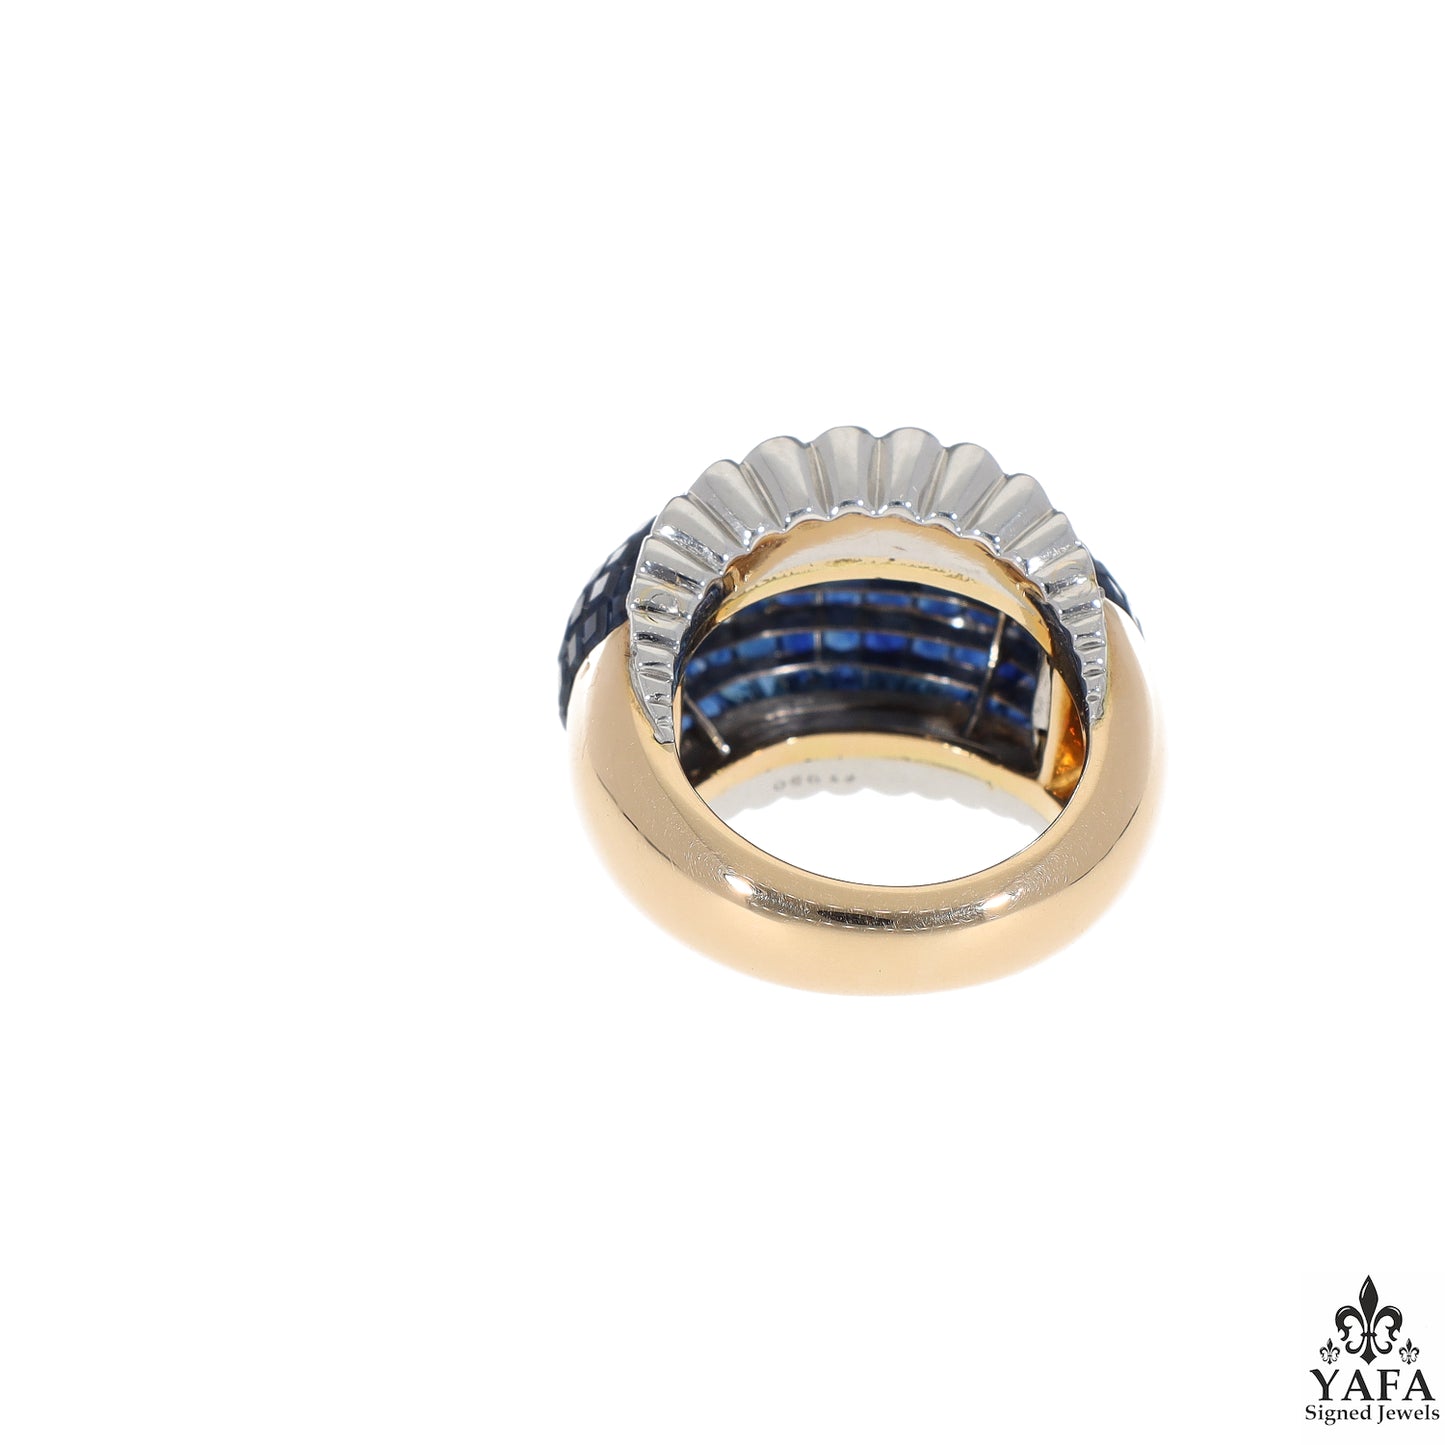 VAN CLEEF & ARPELS Invisibly Set Diamond Sapphire Boule Ring